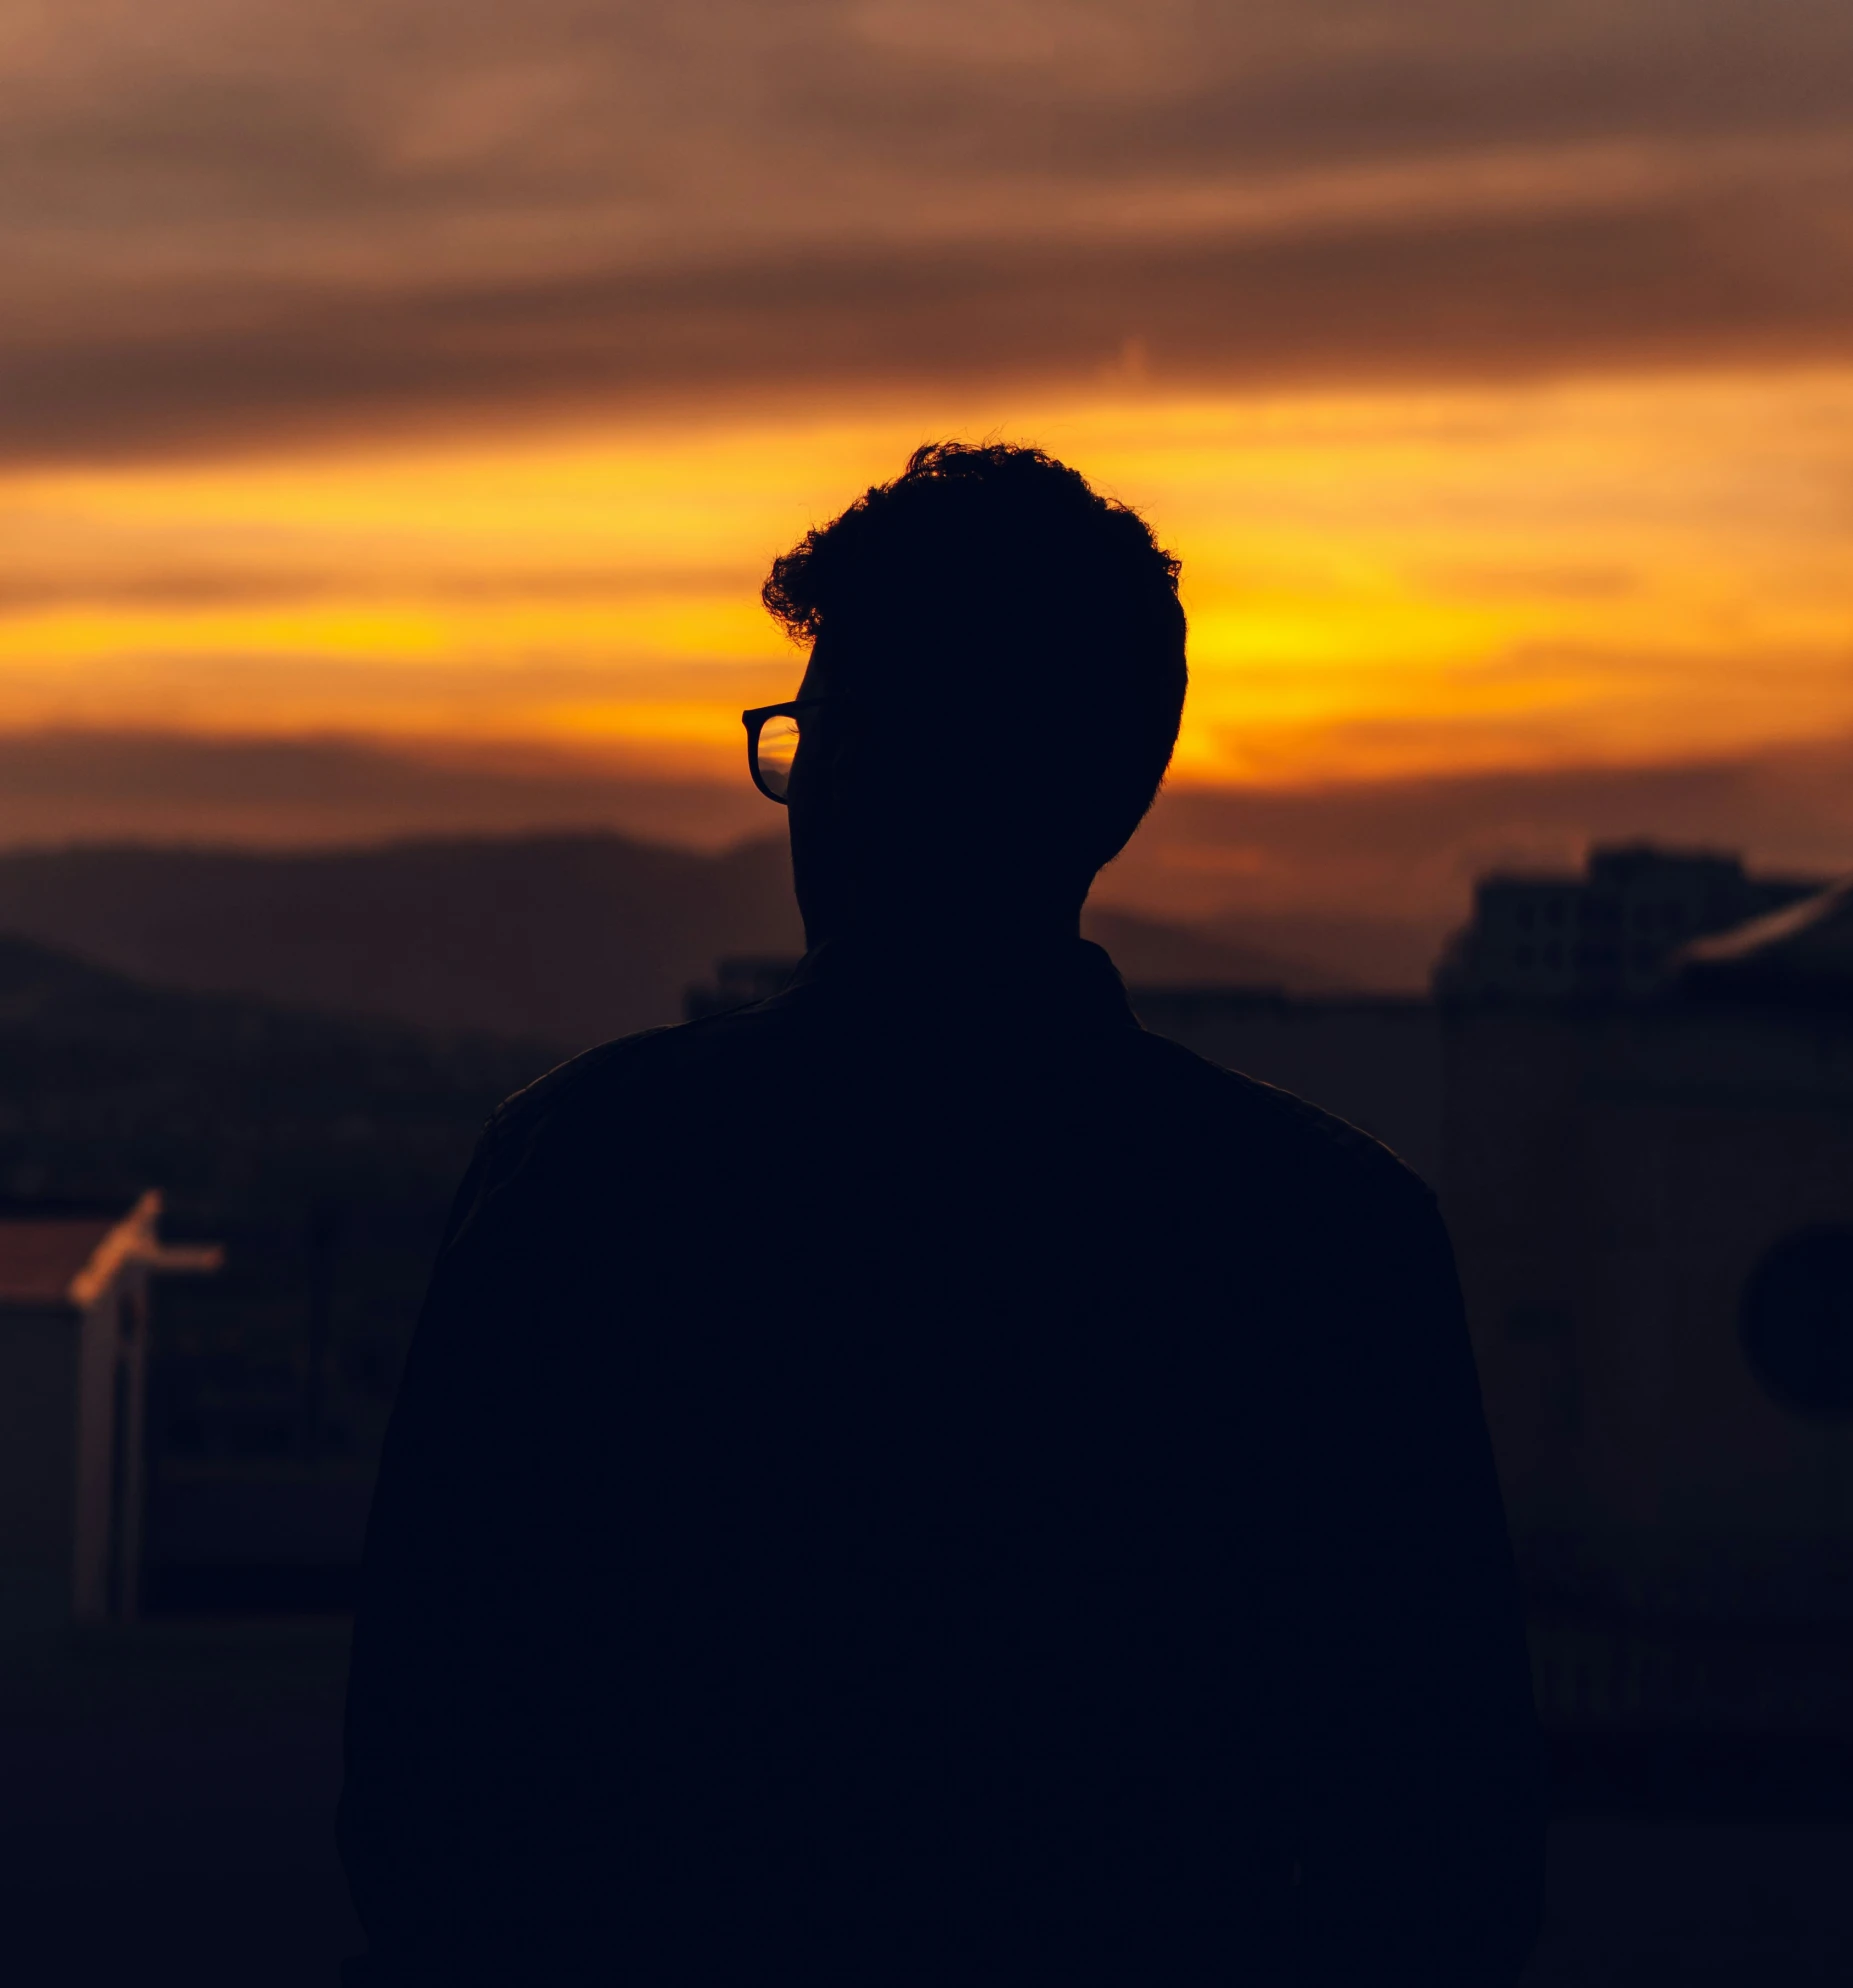 the silhouette of a man with eyeglasses is shown at sunset